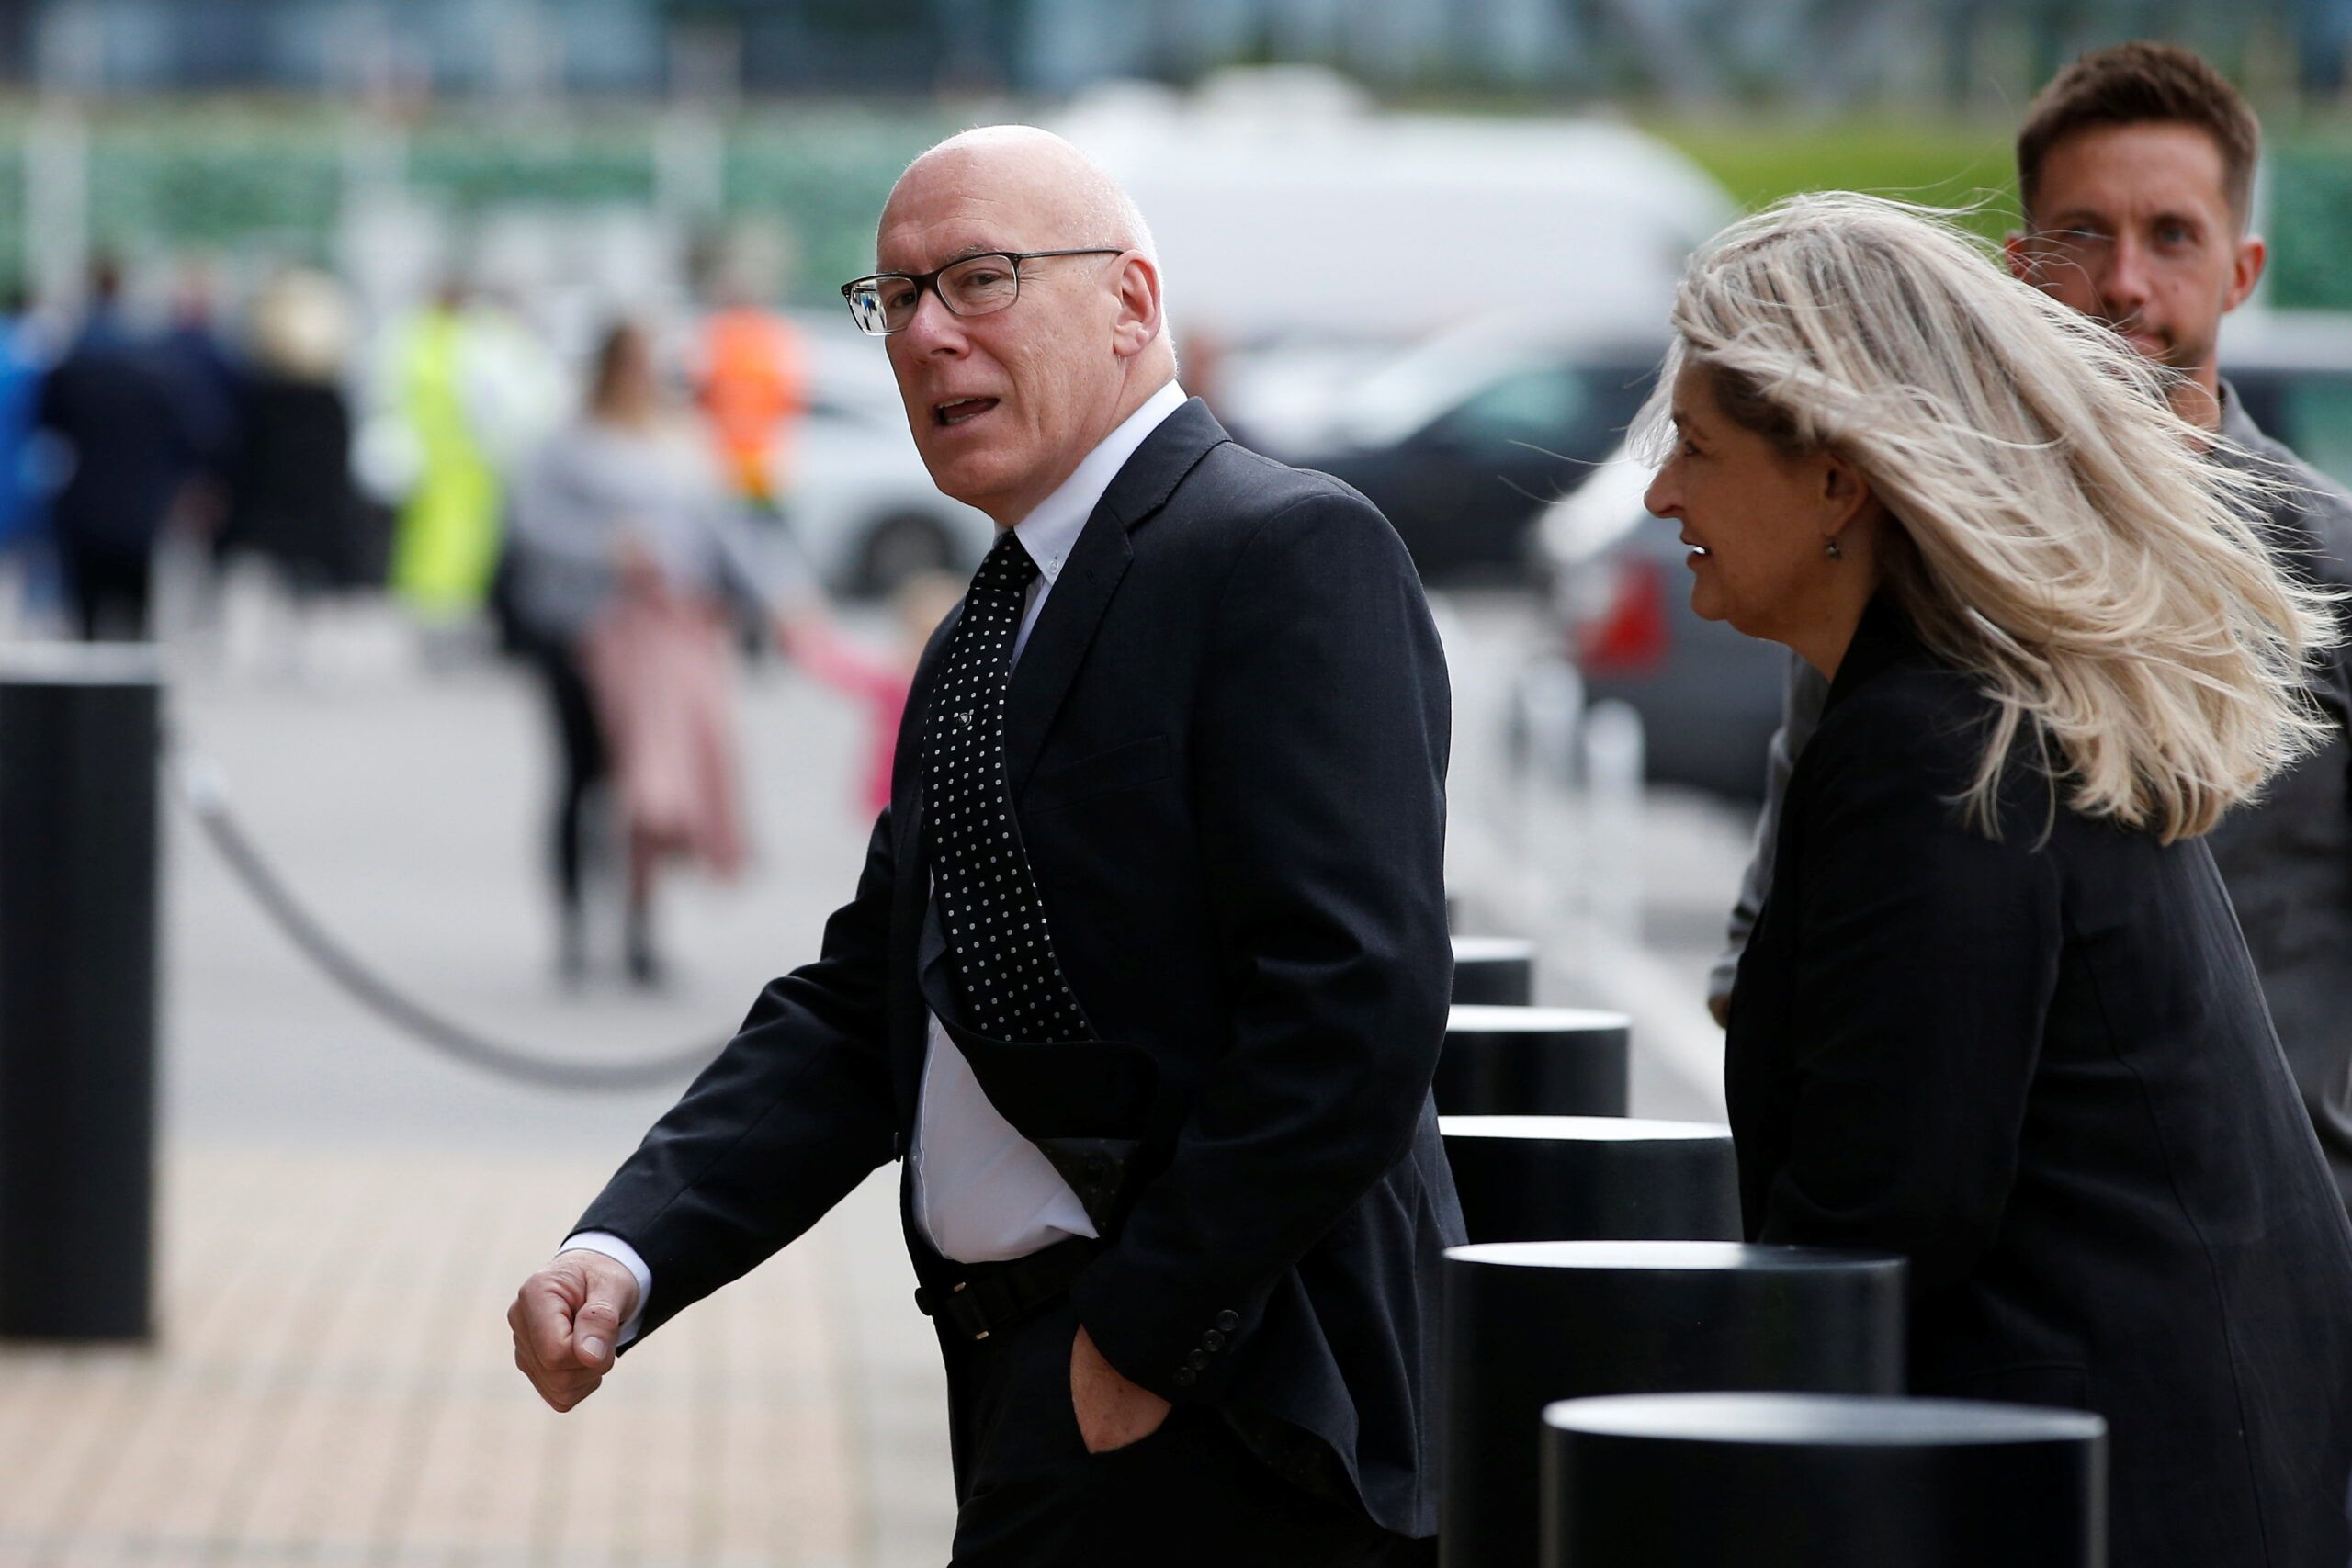 Soccer Football - Championship - Derby County v Huddersfield Town - Pride Park, Derby, Britain - August 7, 2021 Derby County Chairman Mel Morris arrives at the stadium ahead of the match  Action Images/Craig Brough